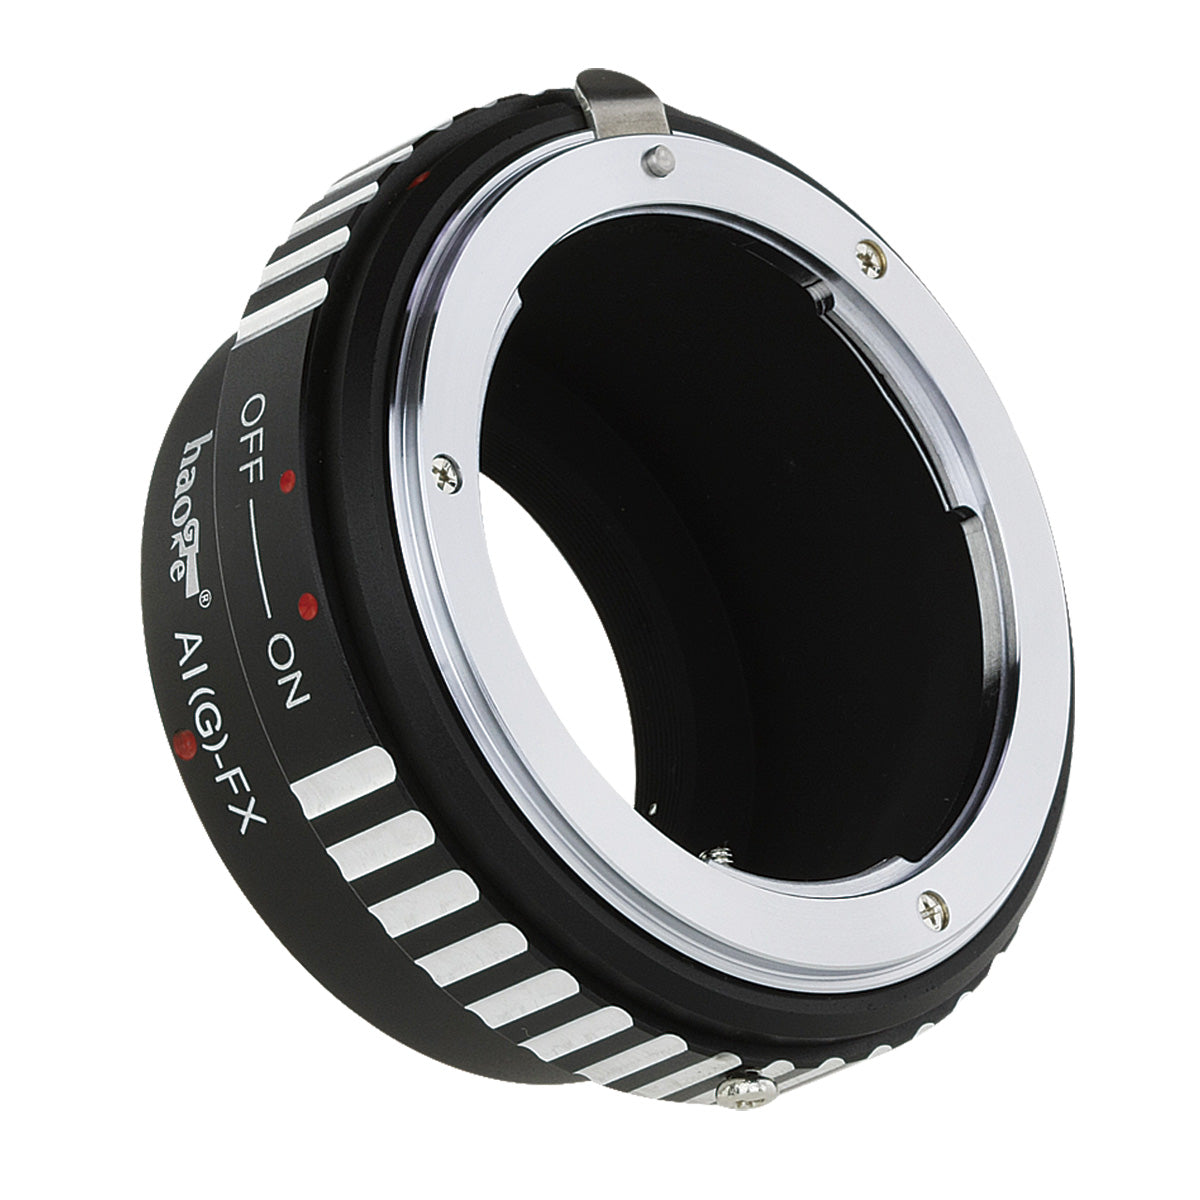 Haoge Lens Mount Adapter for Nikon Nikkor G Lens to Fujifilm X-mount Camera such as X-A1, X-A2, X-A3, X-A10, X-E1, X-E2, X-E2s, X-M1, X-Pro1, X-Pro2, X-T1, X-T2, X-T10, X-T20